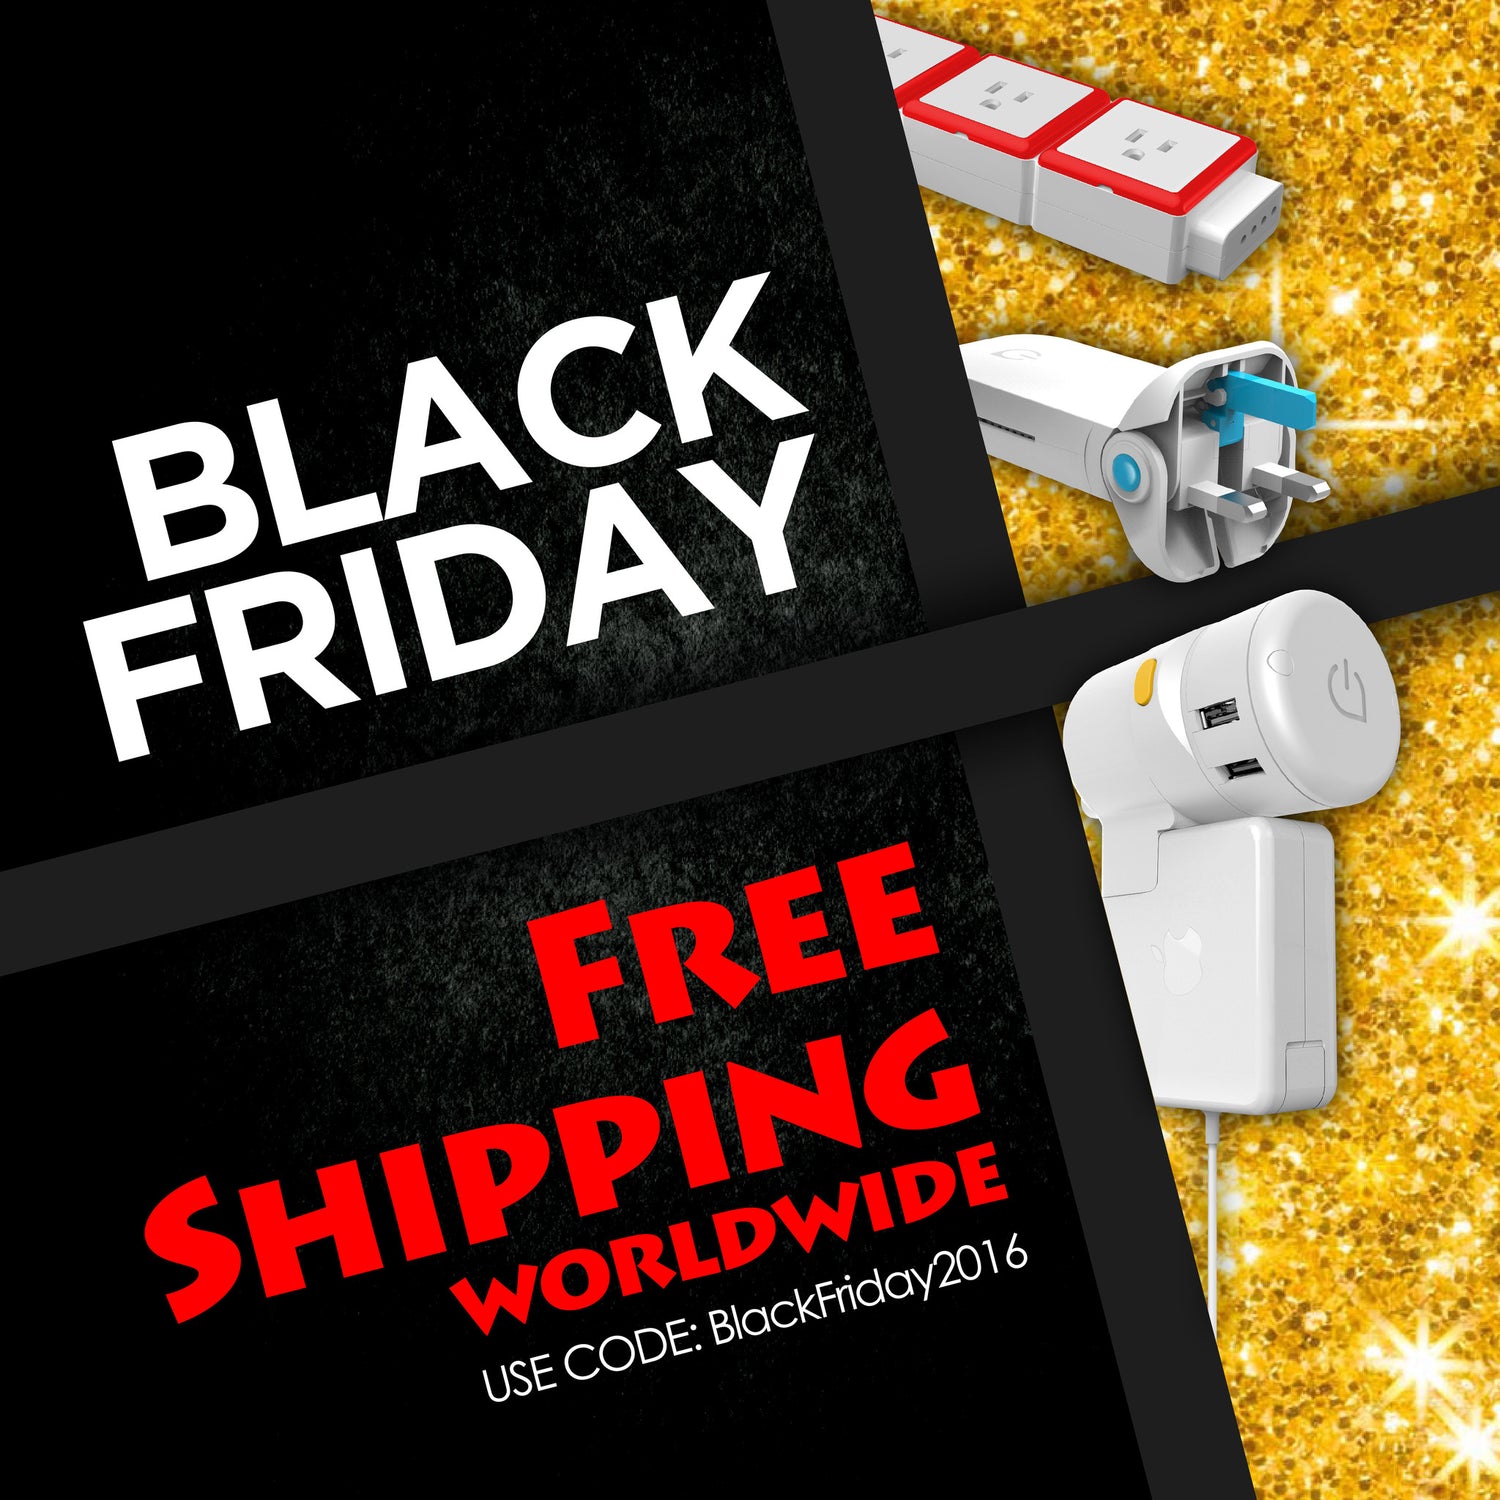 Black Friday & Cyber Monday Free Shipping Offer